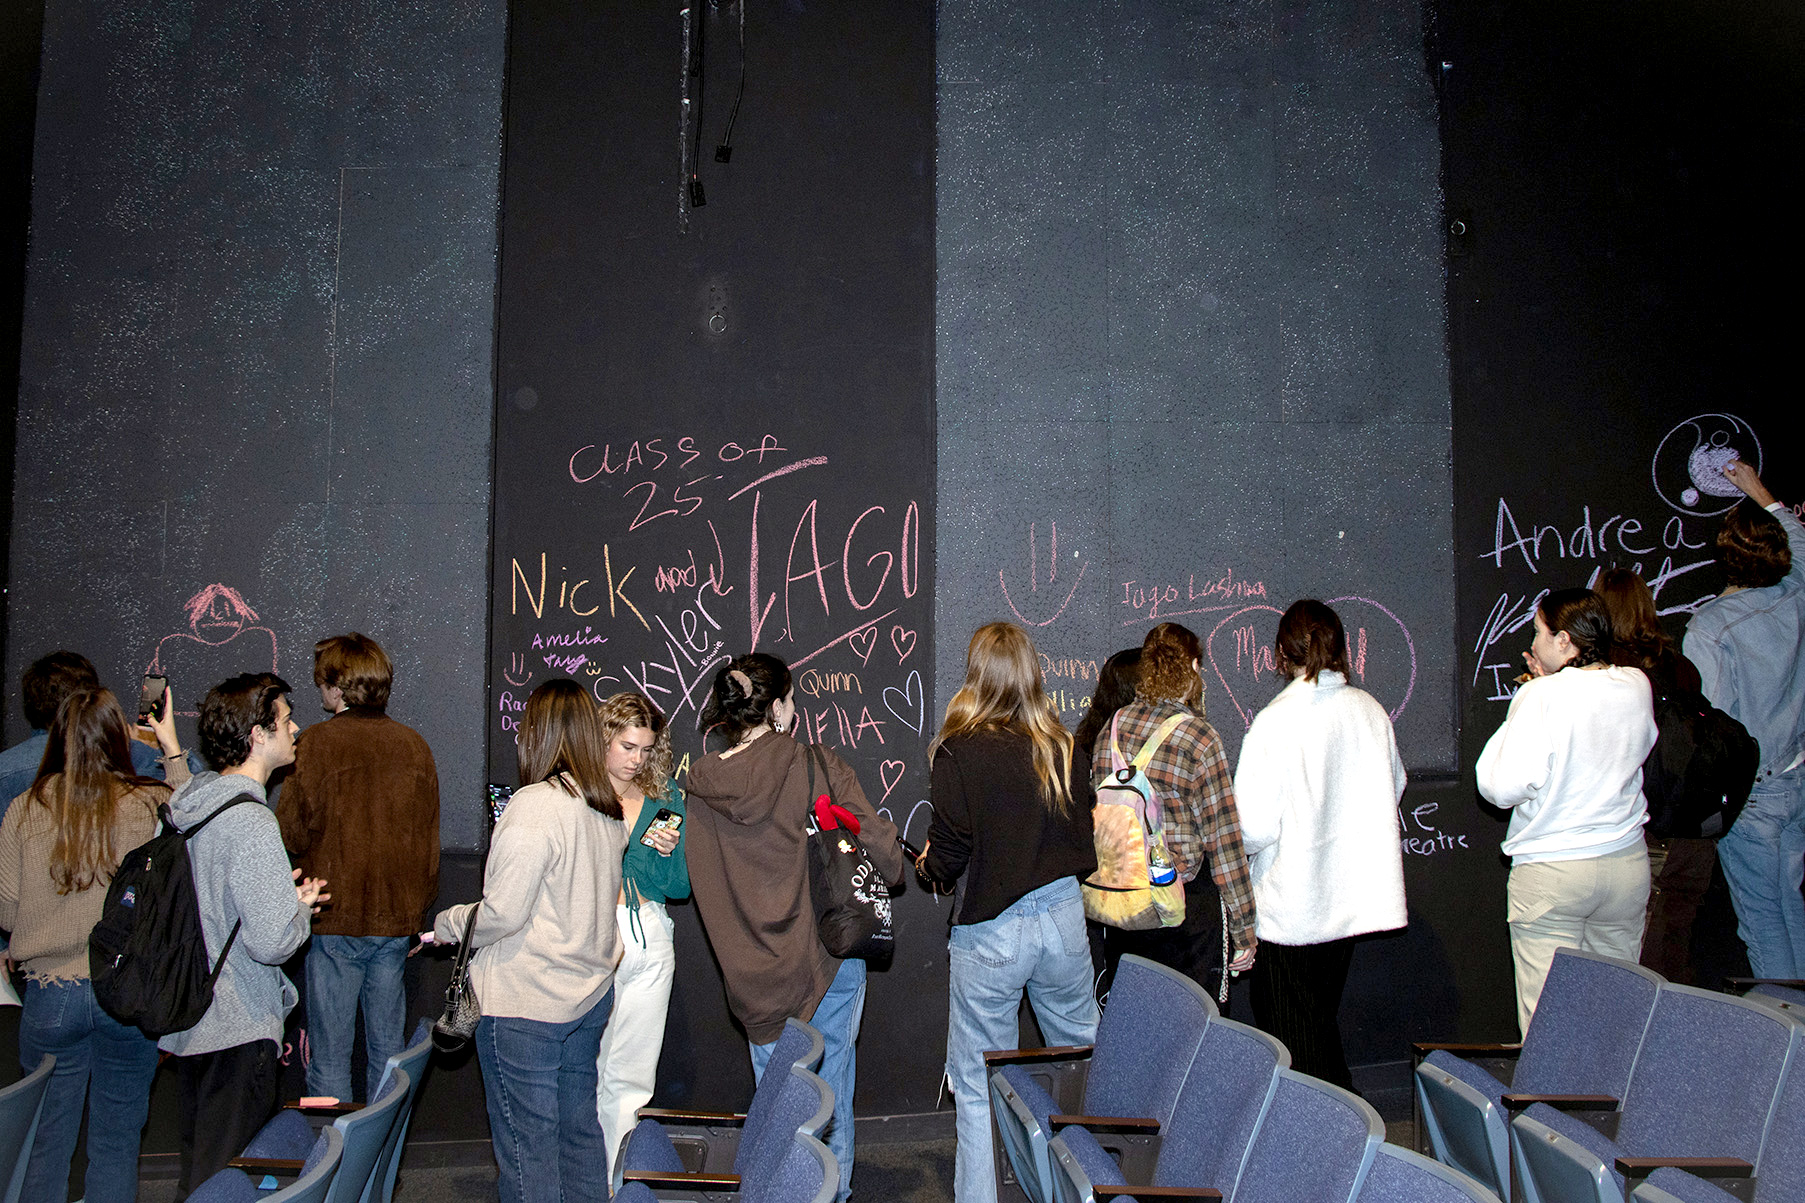 Participants were invited to write reflections and remembrances on the walls of the theatre